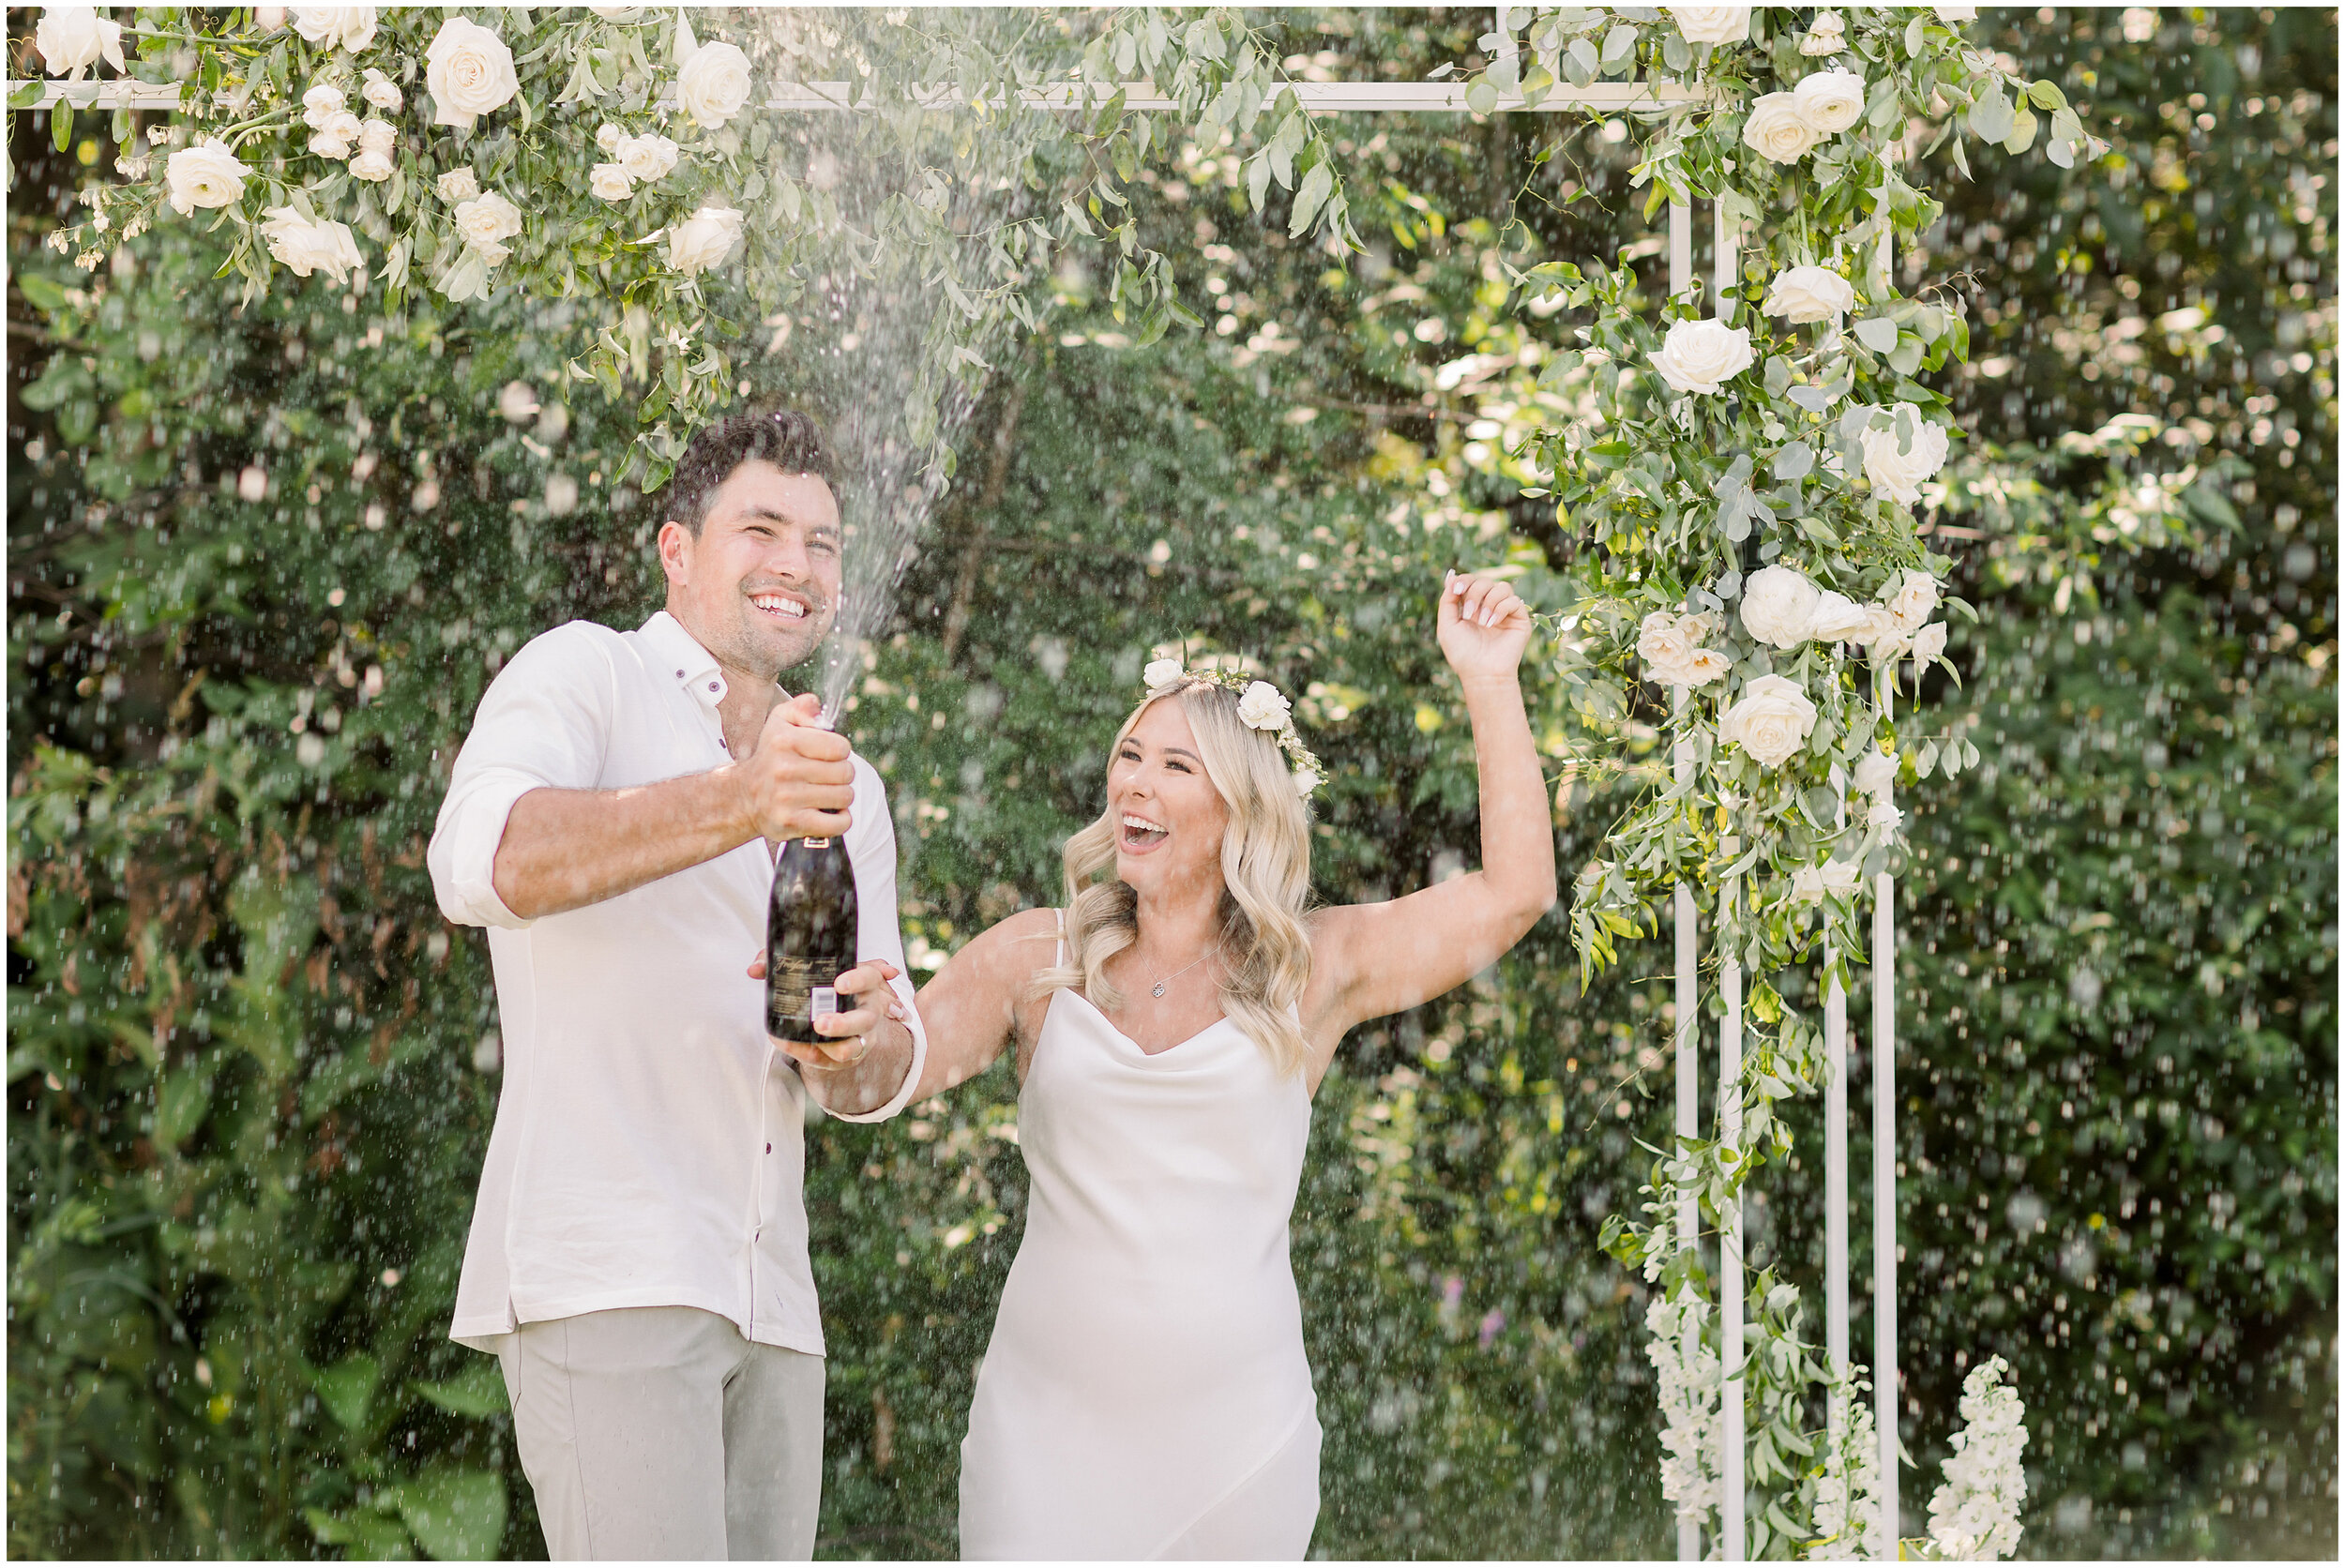  Beautiful bride and groom spraying champagne during wedding ceremony at outdoor backyard wedding in Ottawa, ON by Chelsea Mason. boho outdoor backyard wedding champagne at wedding spraying champagne at wedding outdoor wedding ceremony flower arch we